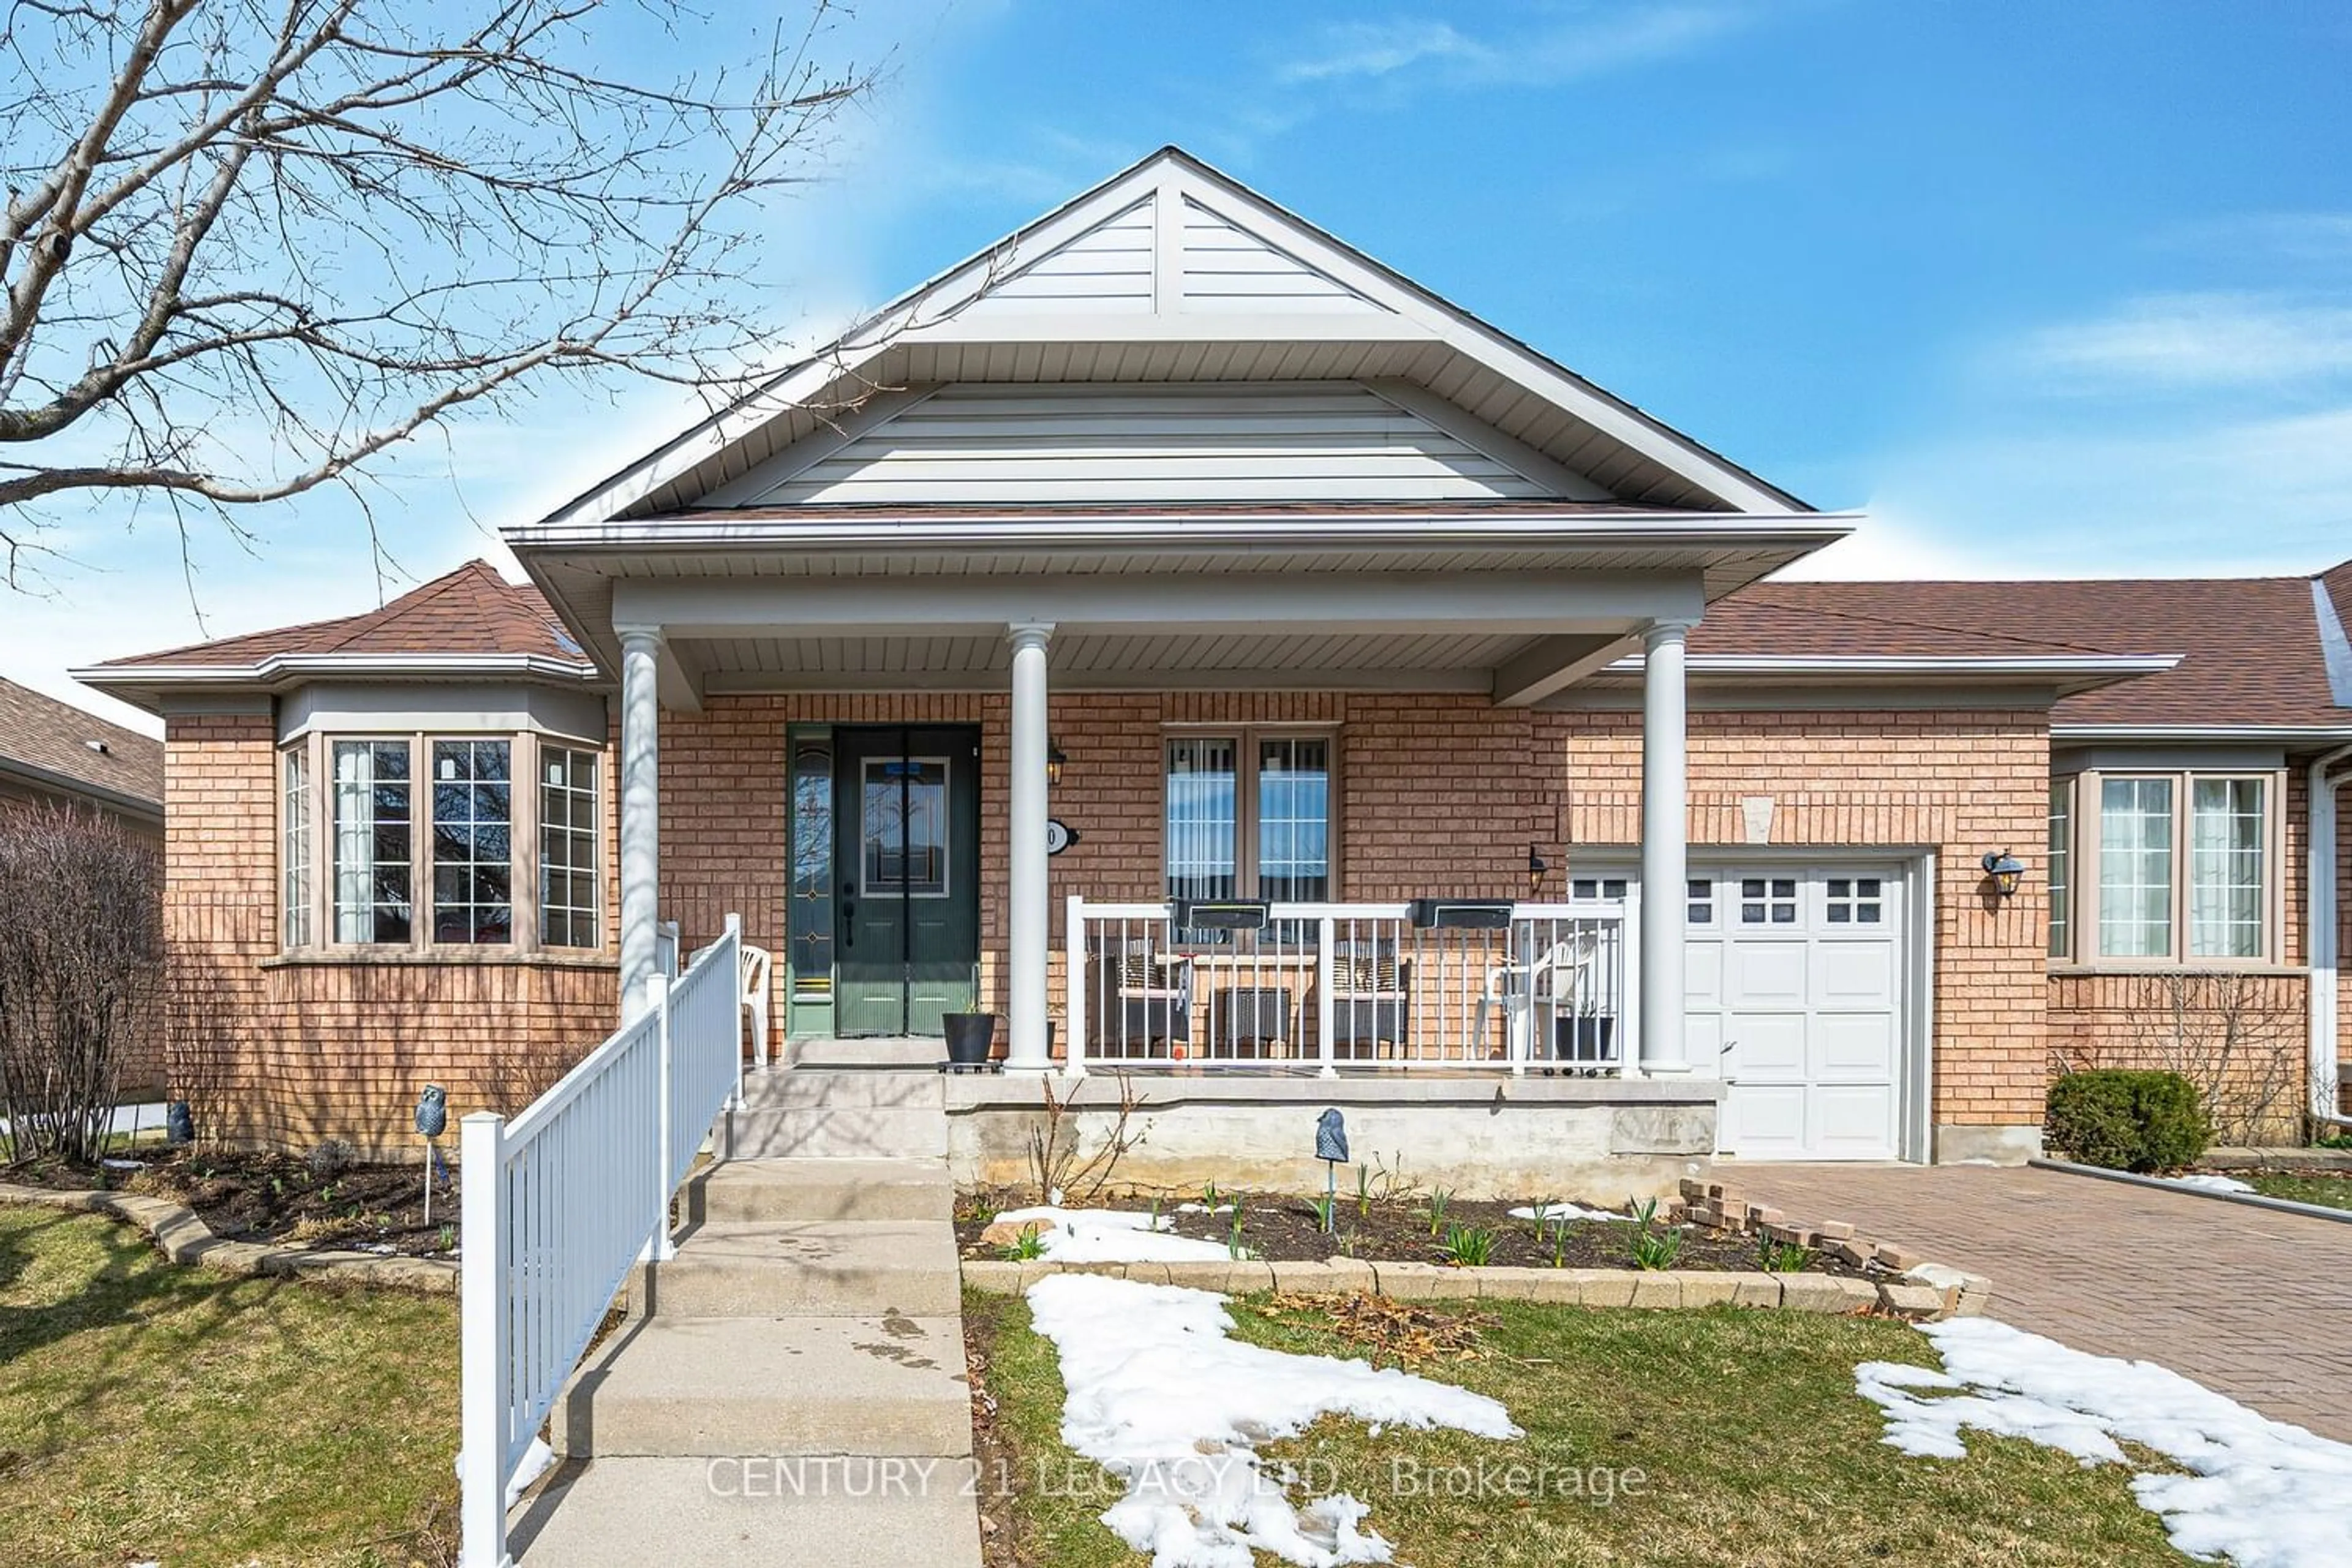 Home with brick exterior material for 10 Amberhill Tr #46, Brampton Ontario L6R 2R7